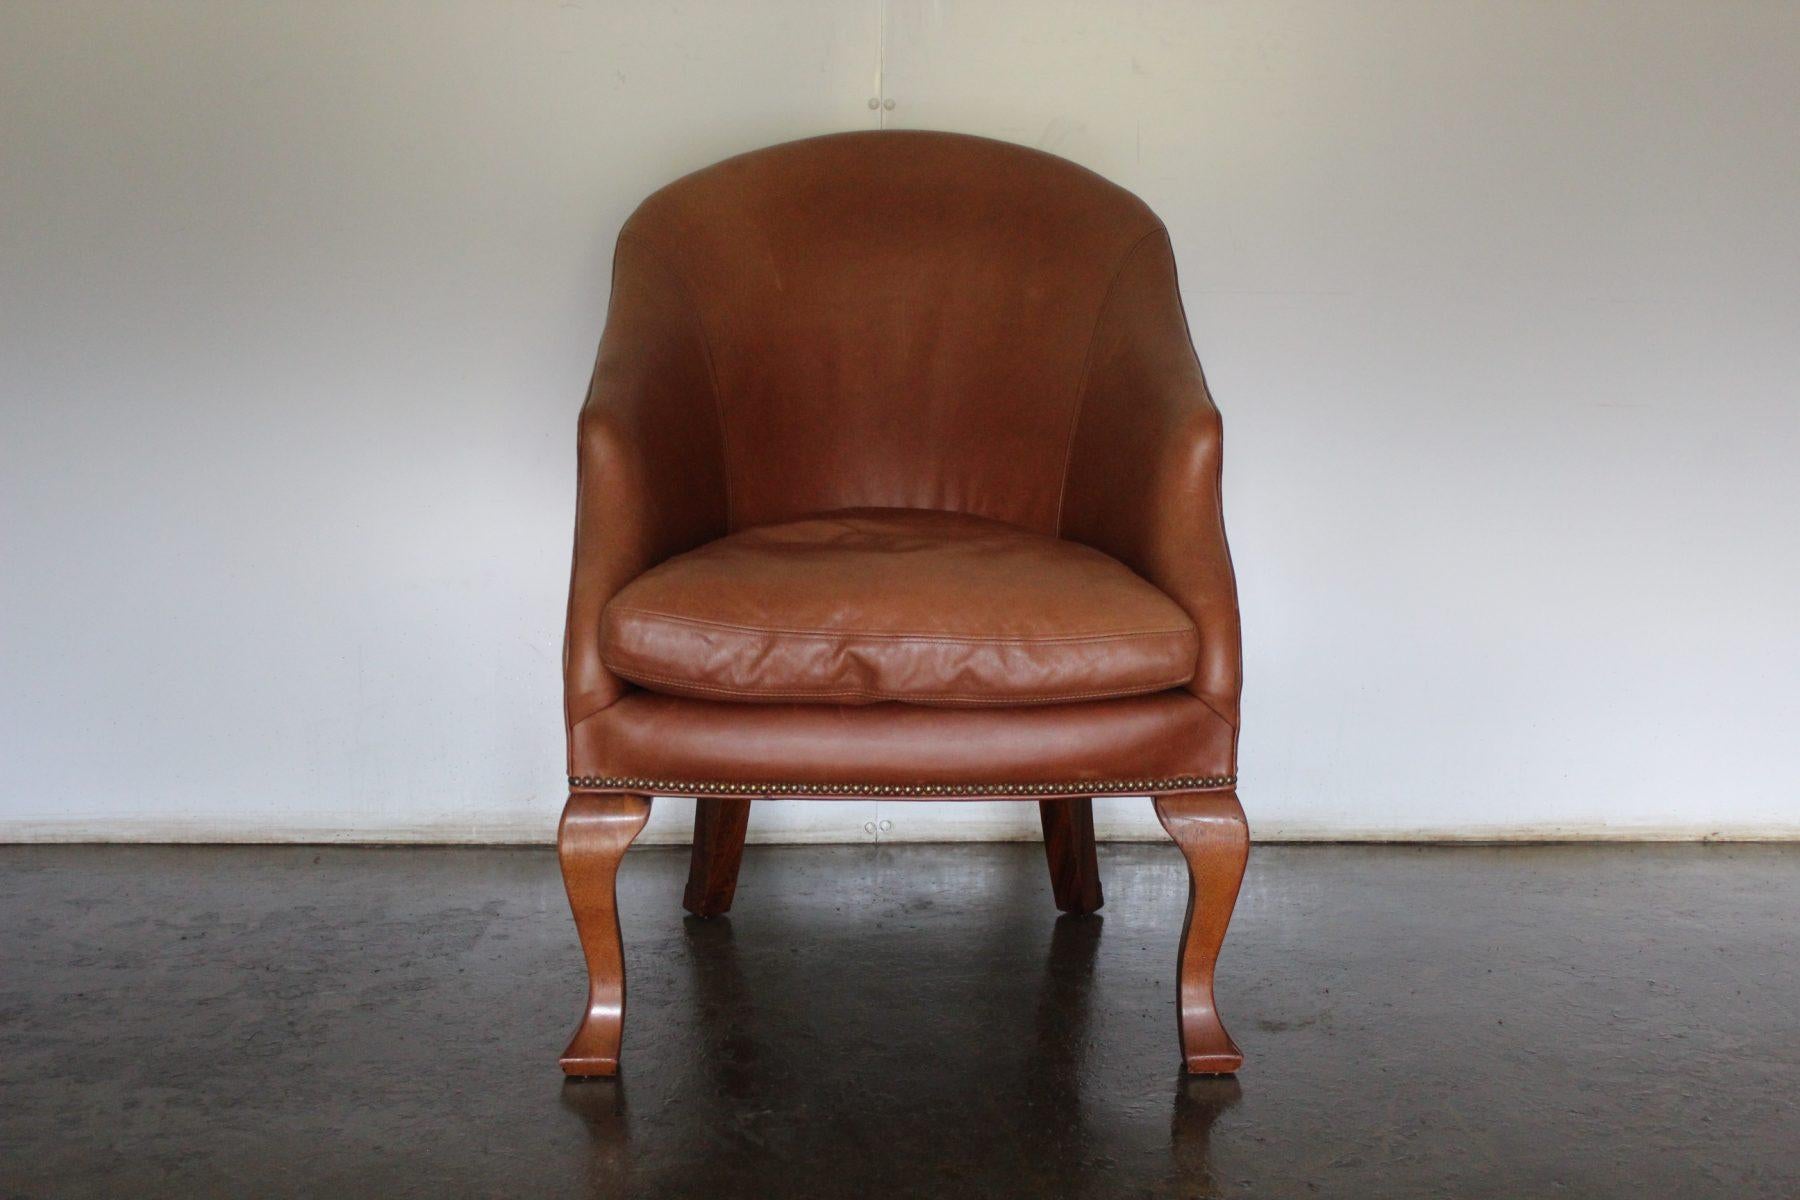 Rare Sublime Ralph Lauren “Beldon” Armchair in Tan Brown Saddle Leather In Good Condition For Sale In Barrowford, GB